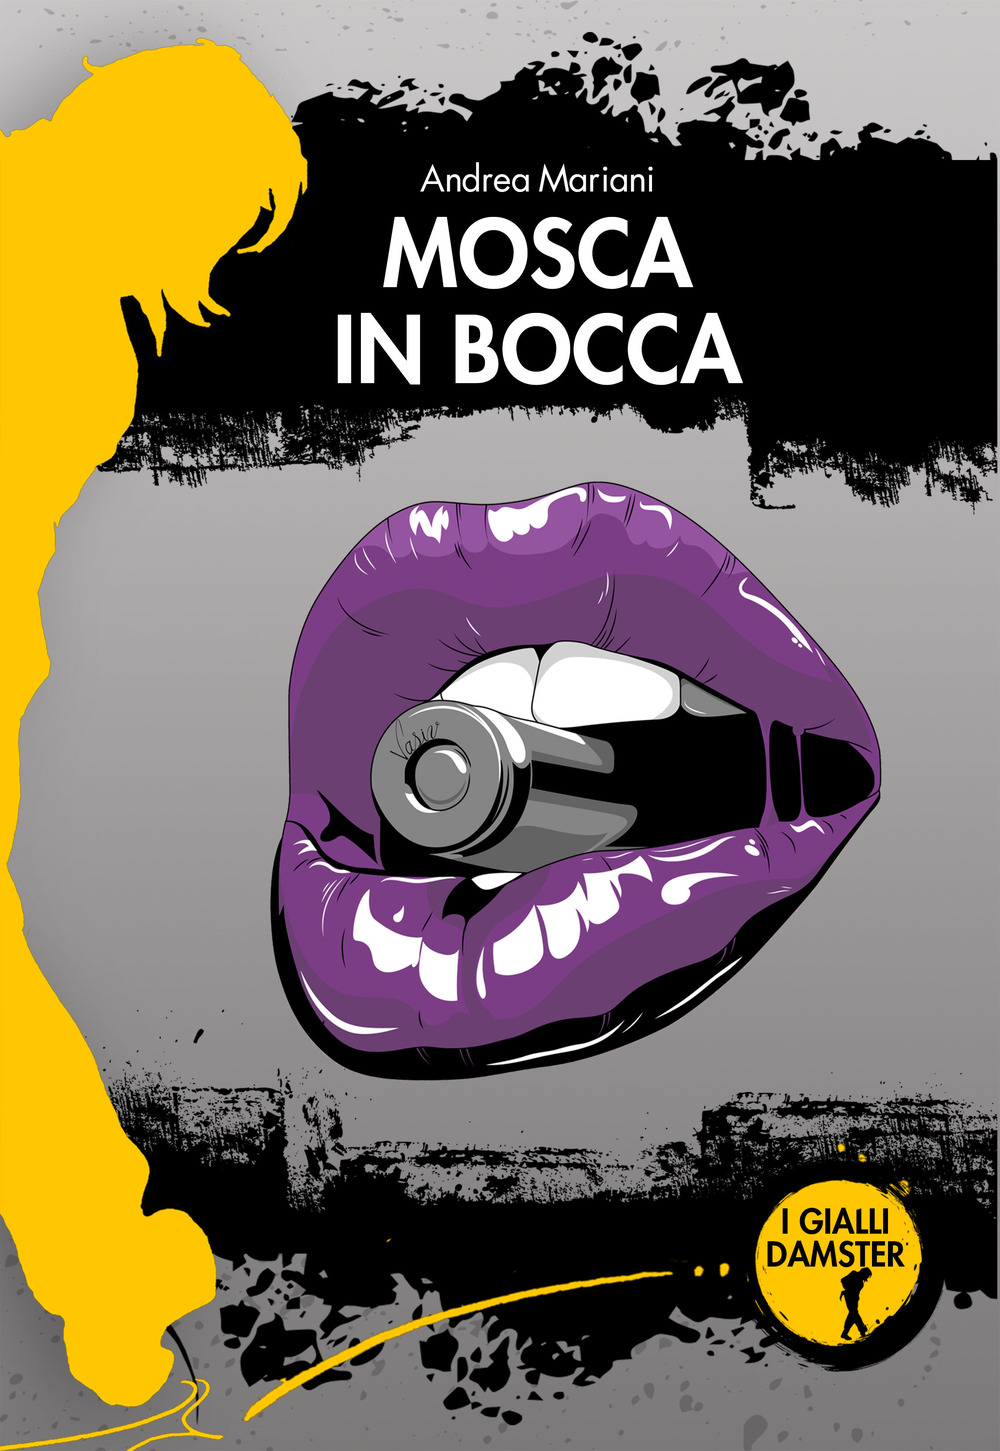 Mosca in bocca